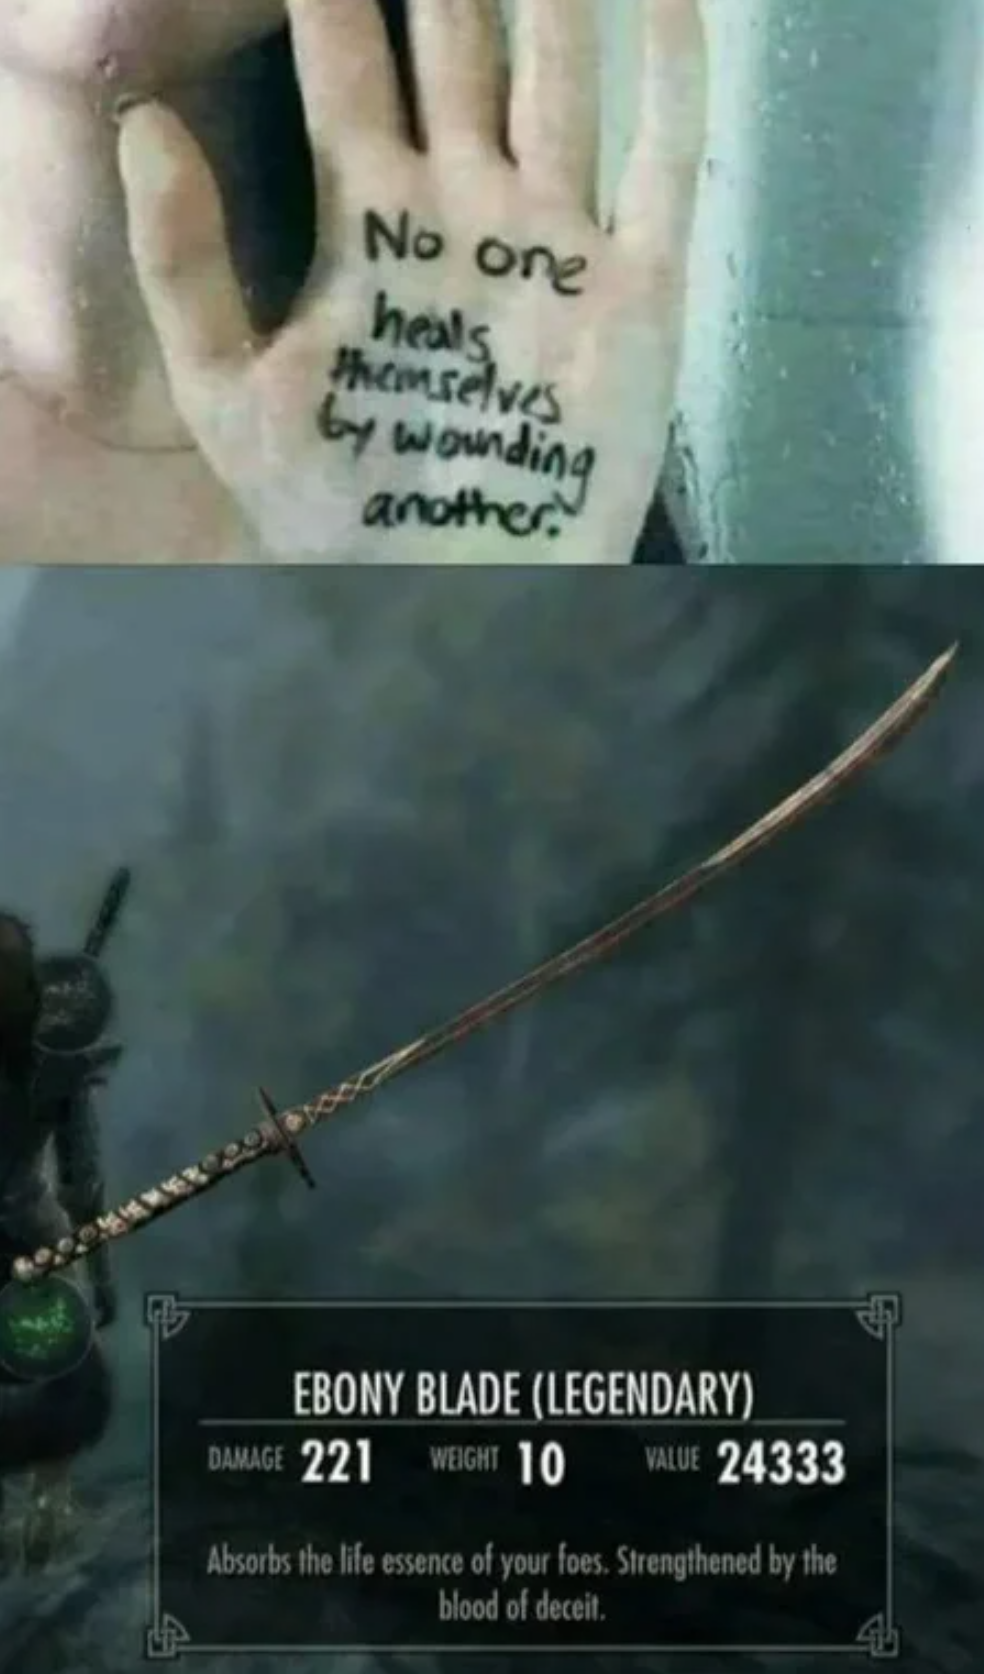 funny gaming memes - skyrim meme - No one heals Themselves by wounding another Ebony Blade Legendary Wg 221 Wg 10 W 24333 Absorbs the life essence of your foes. Strengthened by the blood of decal.